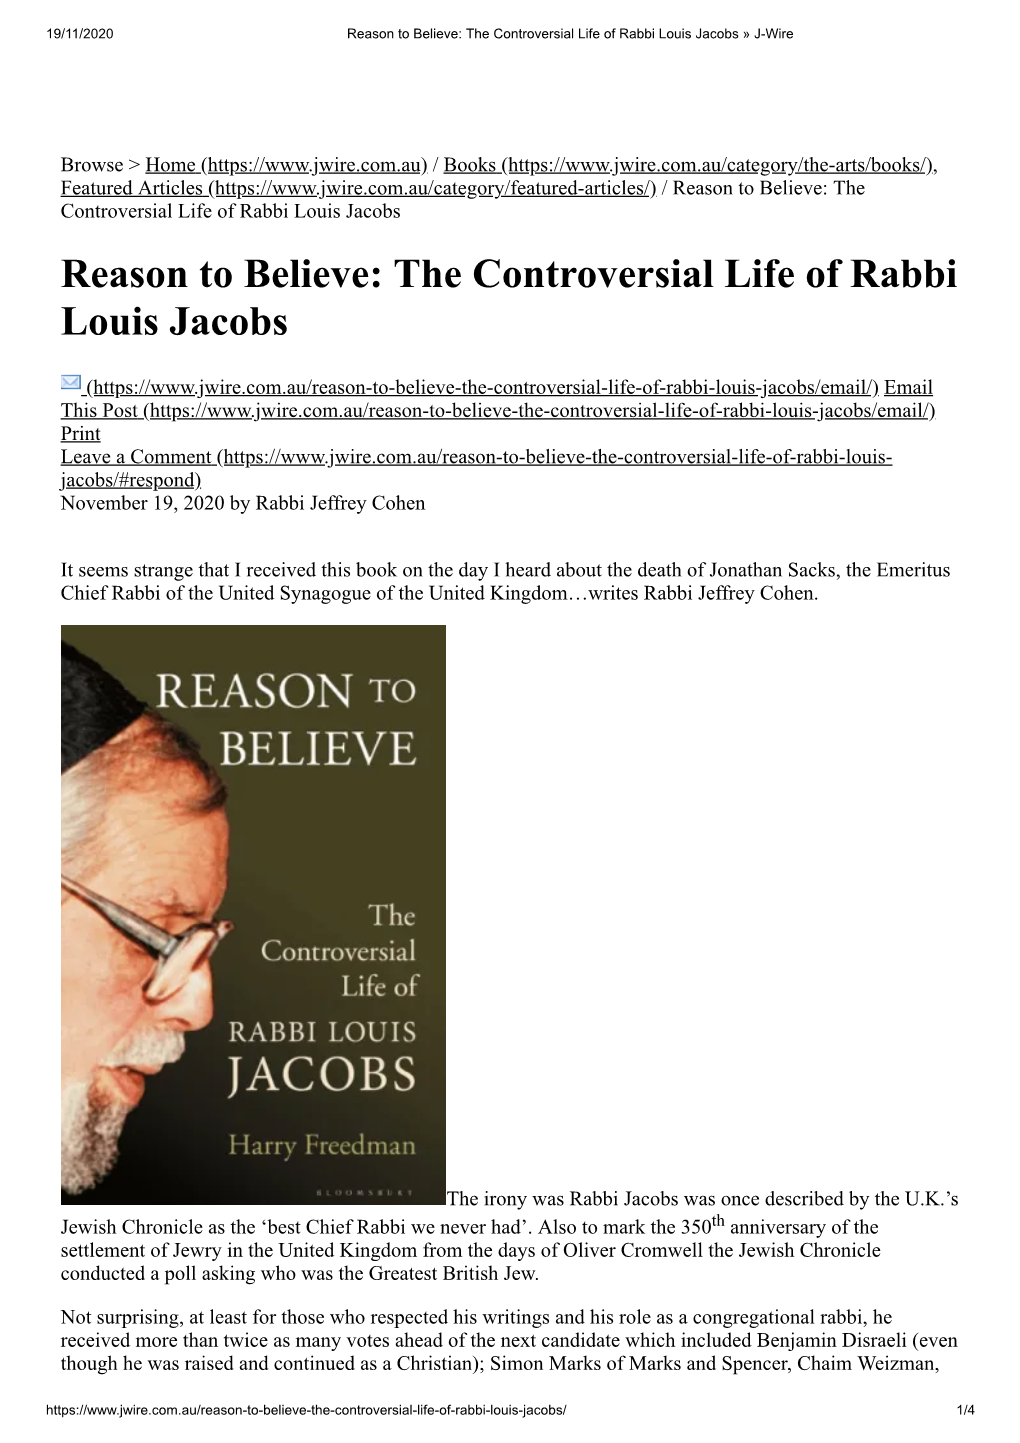 The Controversial Life of Rabbi Louis Jacobs » J-Wire